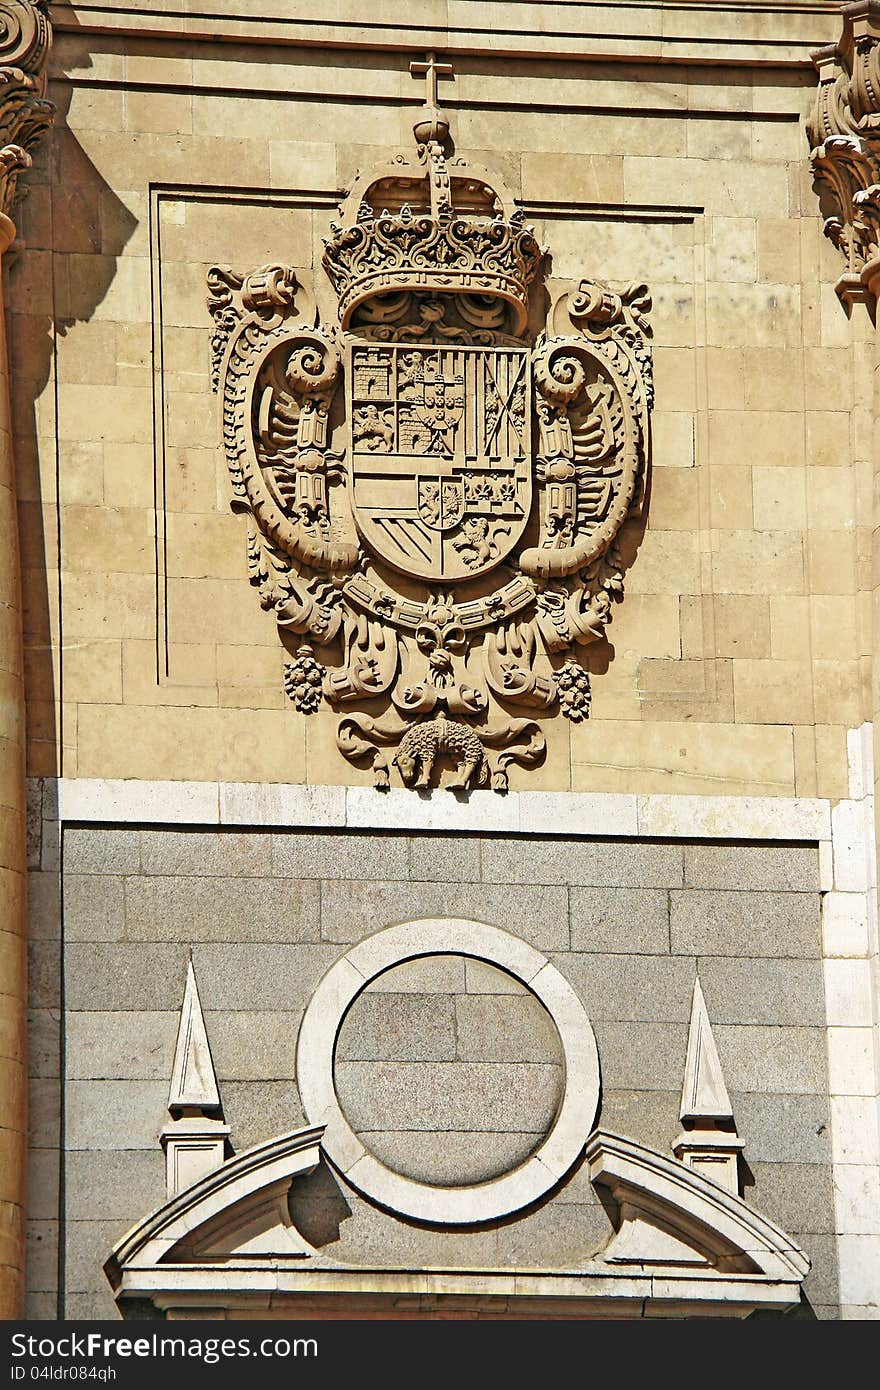 An engraving of the official seal and emblem of the Spanish monarchy on a sandstone facade in Salamanca, Segovia. An engraving of the official seal and emblem of the Spanish monarchy on a sandstone facade in Salamanca, Segovia.